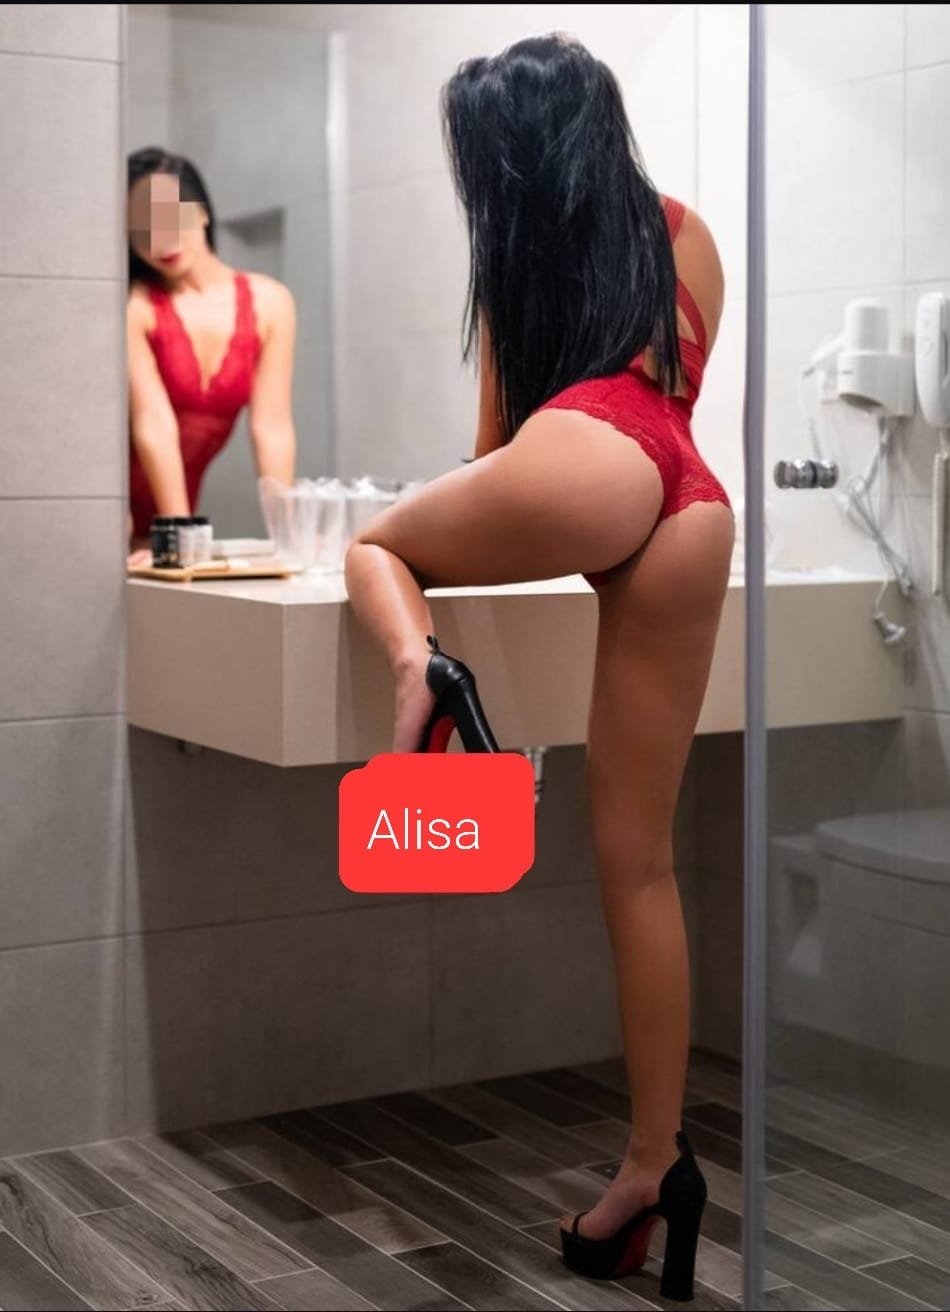 Find Escort Service in Memmingen and Enjoy Time With Pretty Girls - model photo Alisa82